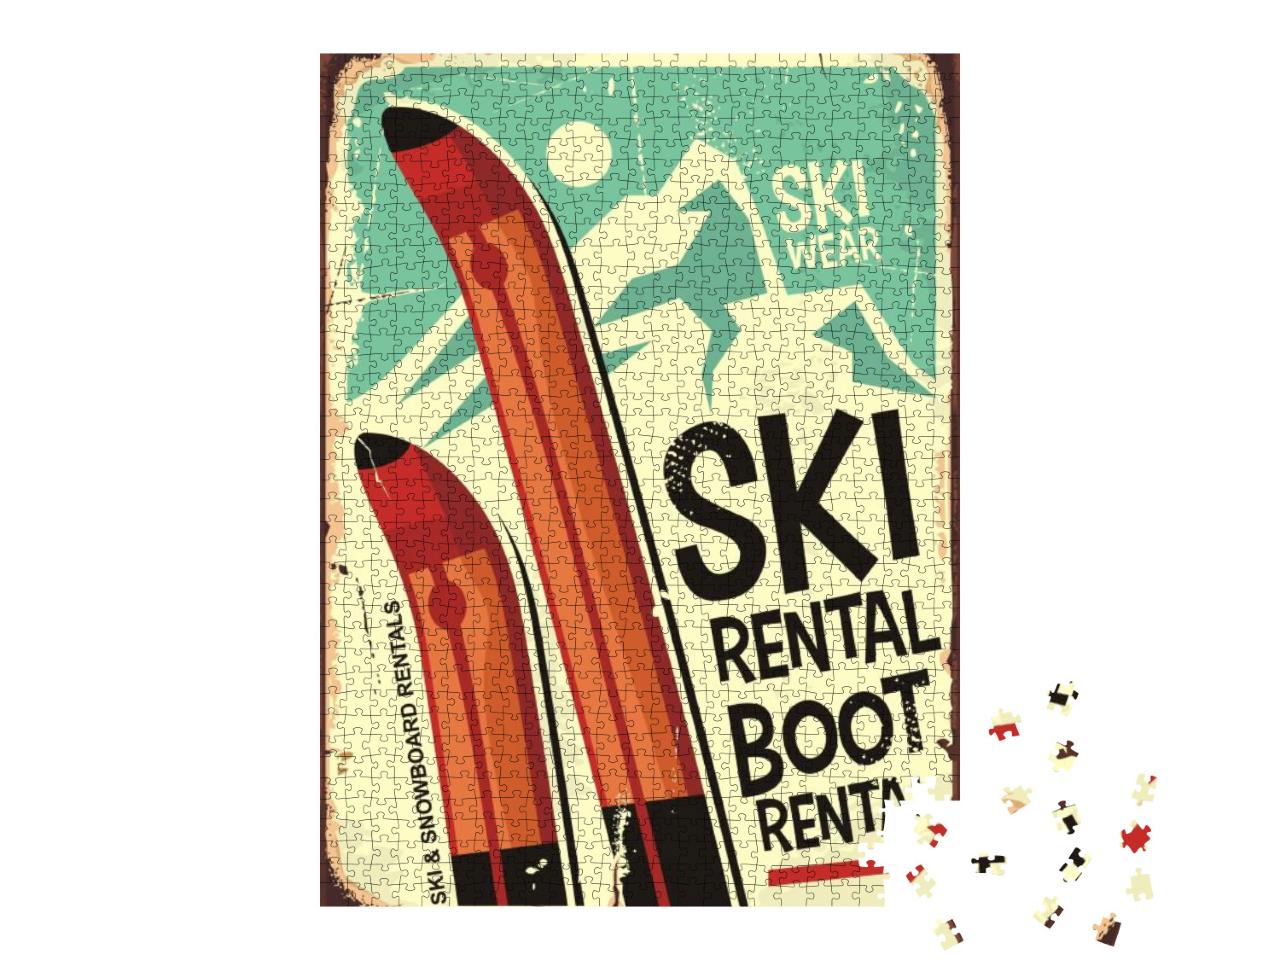 Ski Rental Retro Sign Design with Pair of Skis & Winter M... Jigsaw Puzzle with 1000 pieces